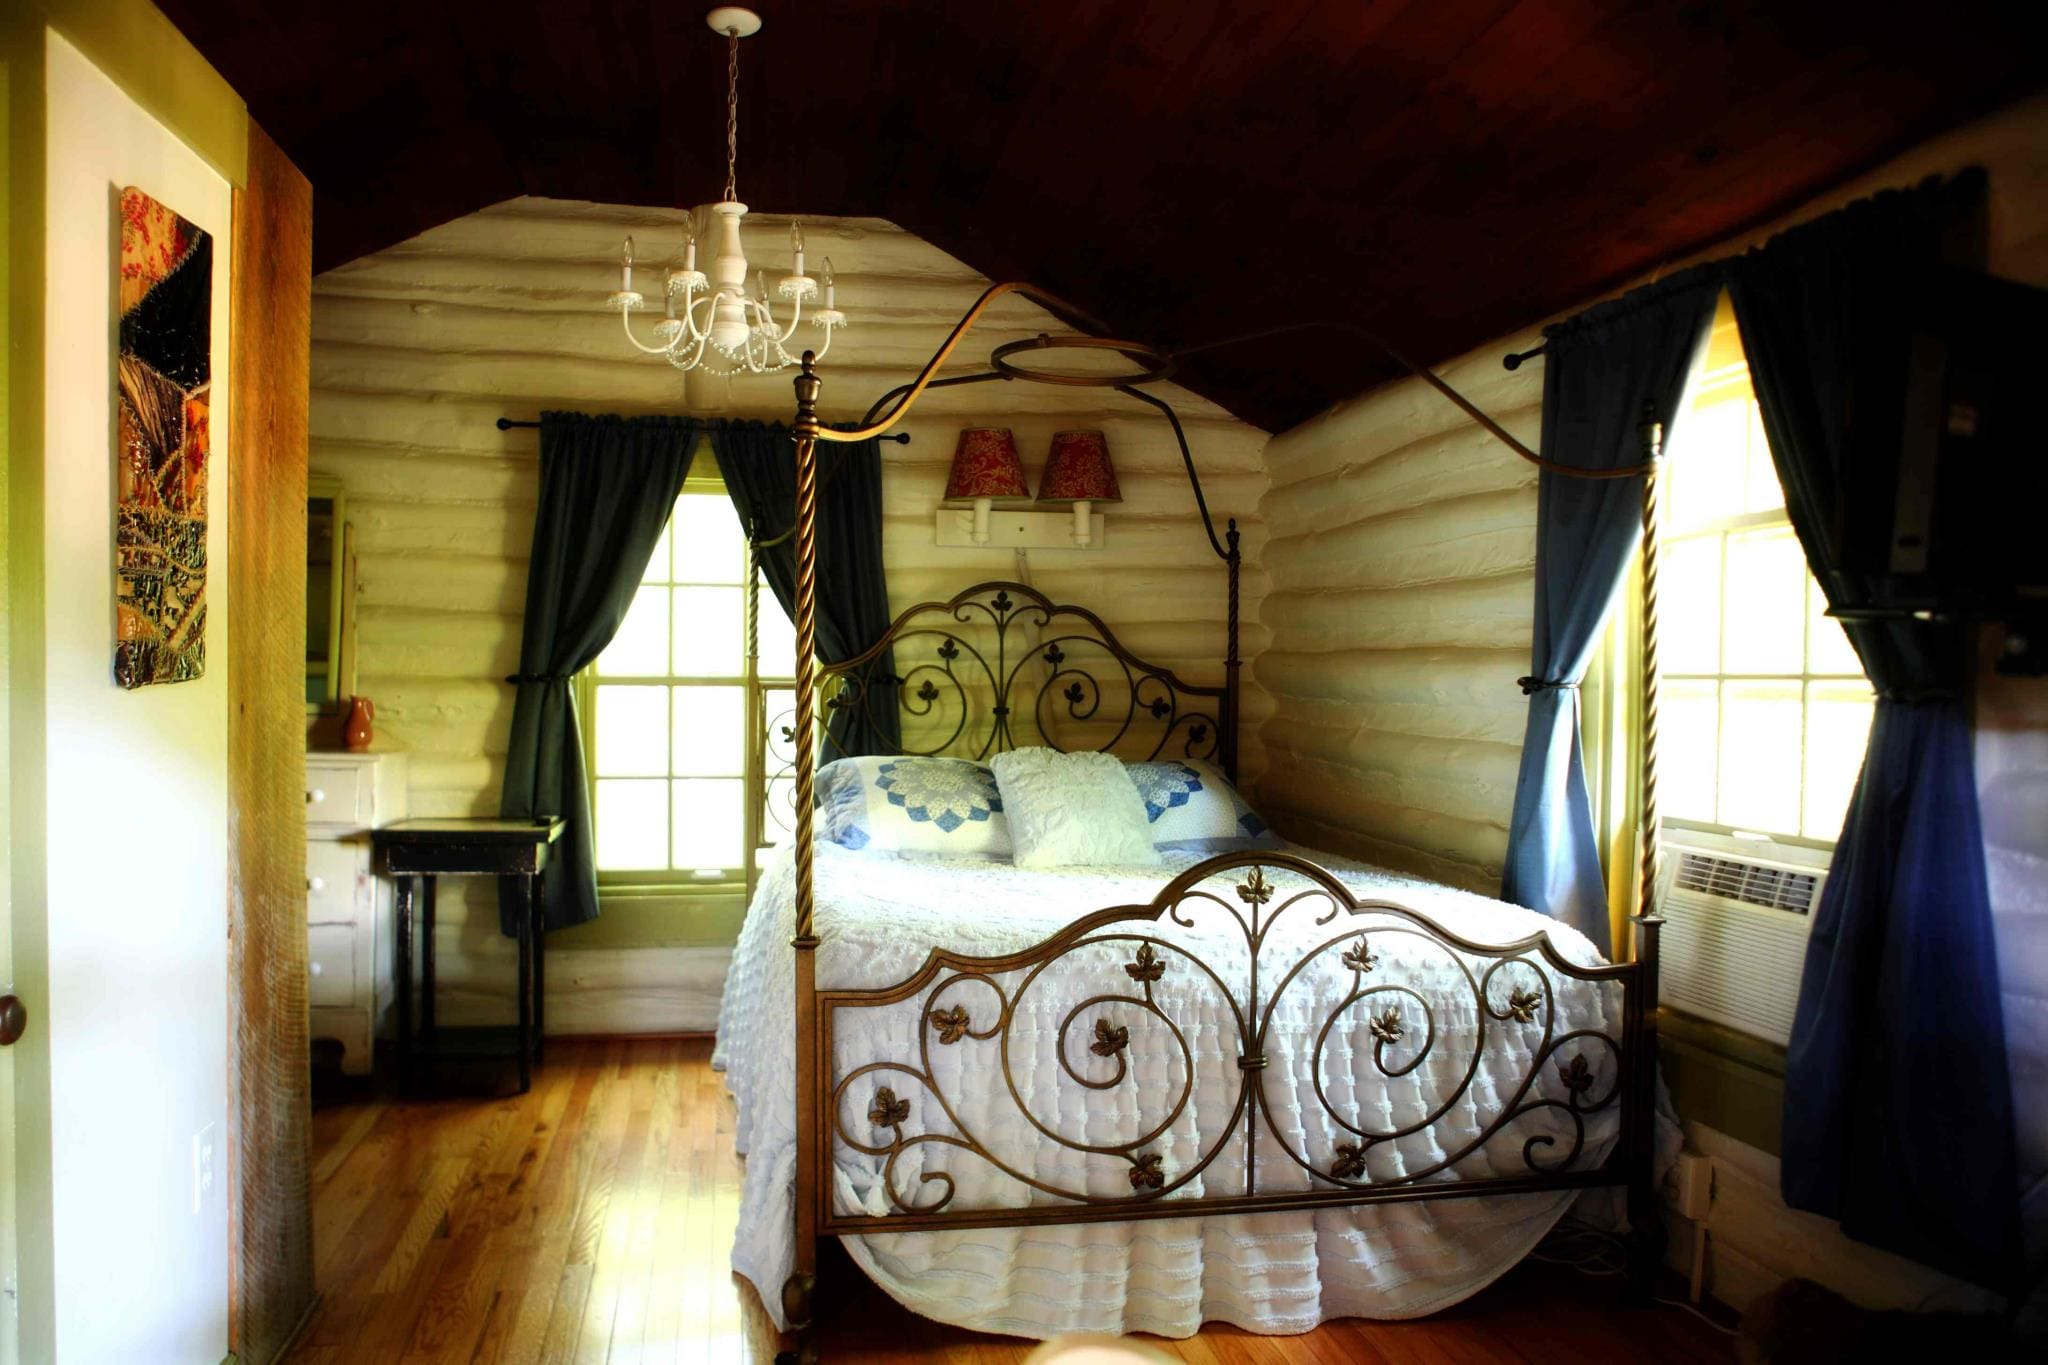 Inside one of the cozy bedrooms of a cabin at The Pines Cottages.